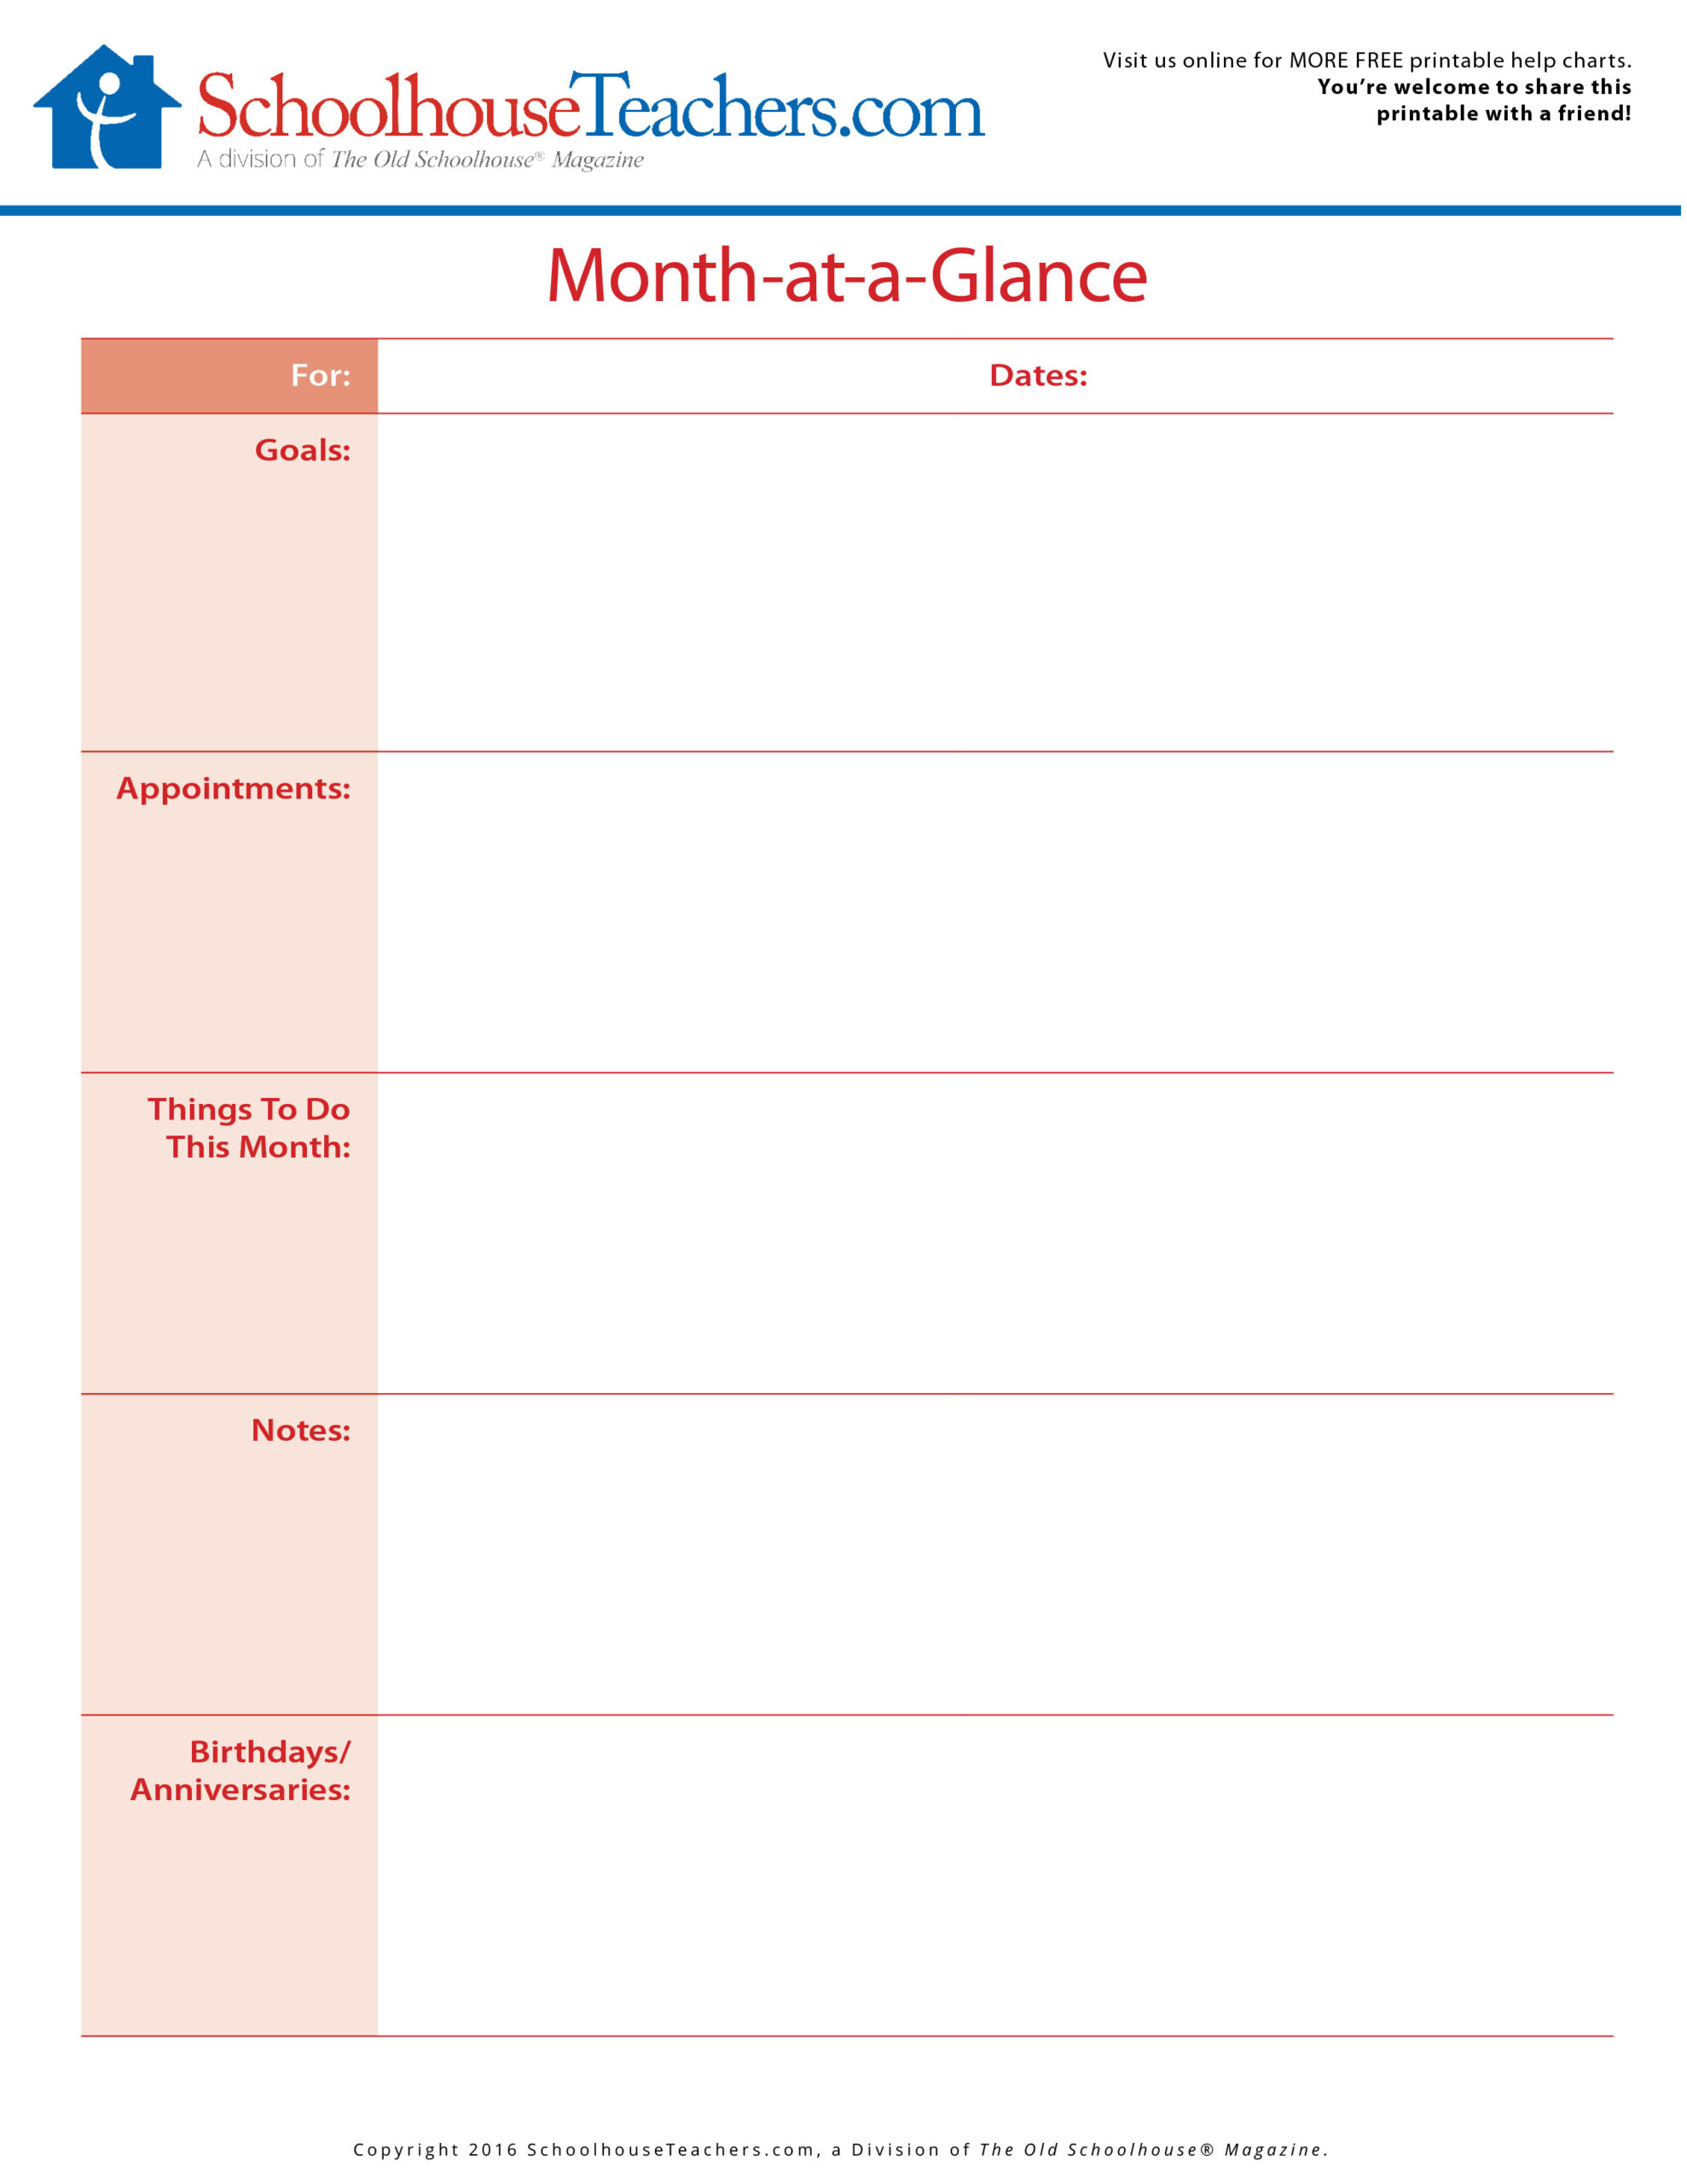 Free Printable Monthly Goals And Month At A Glance Planner